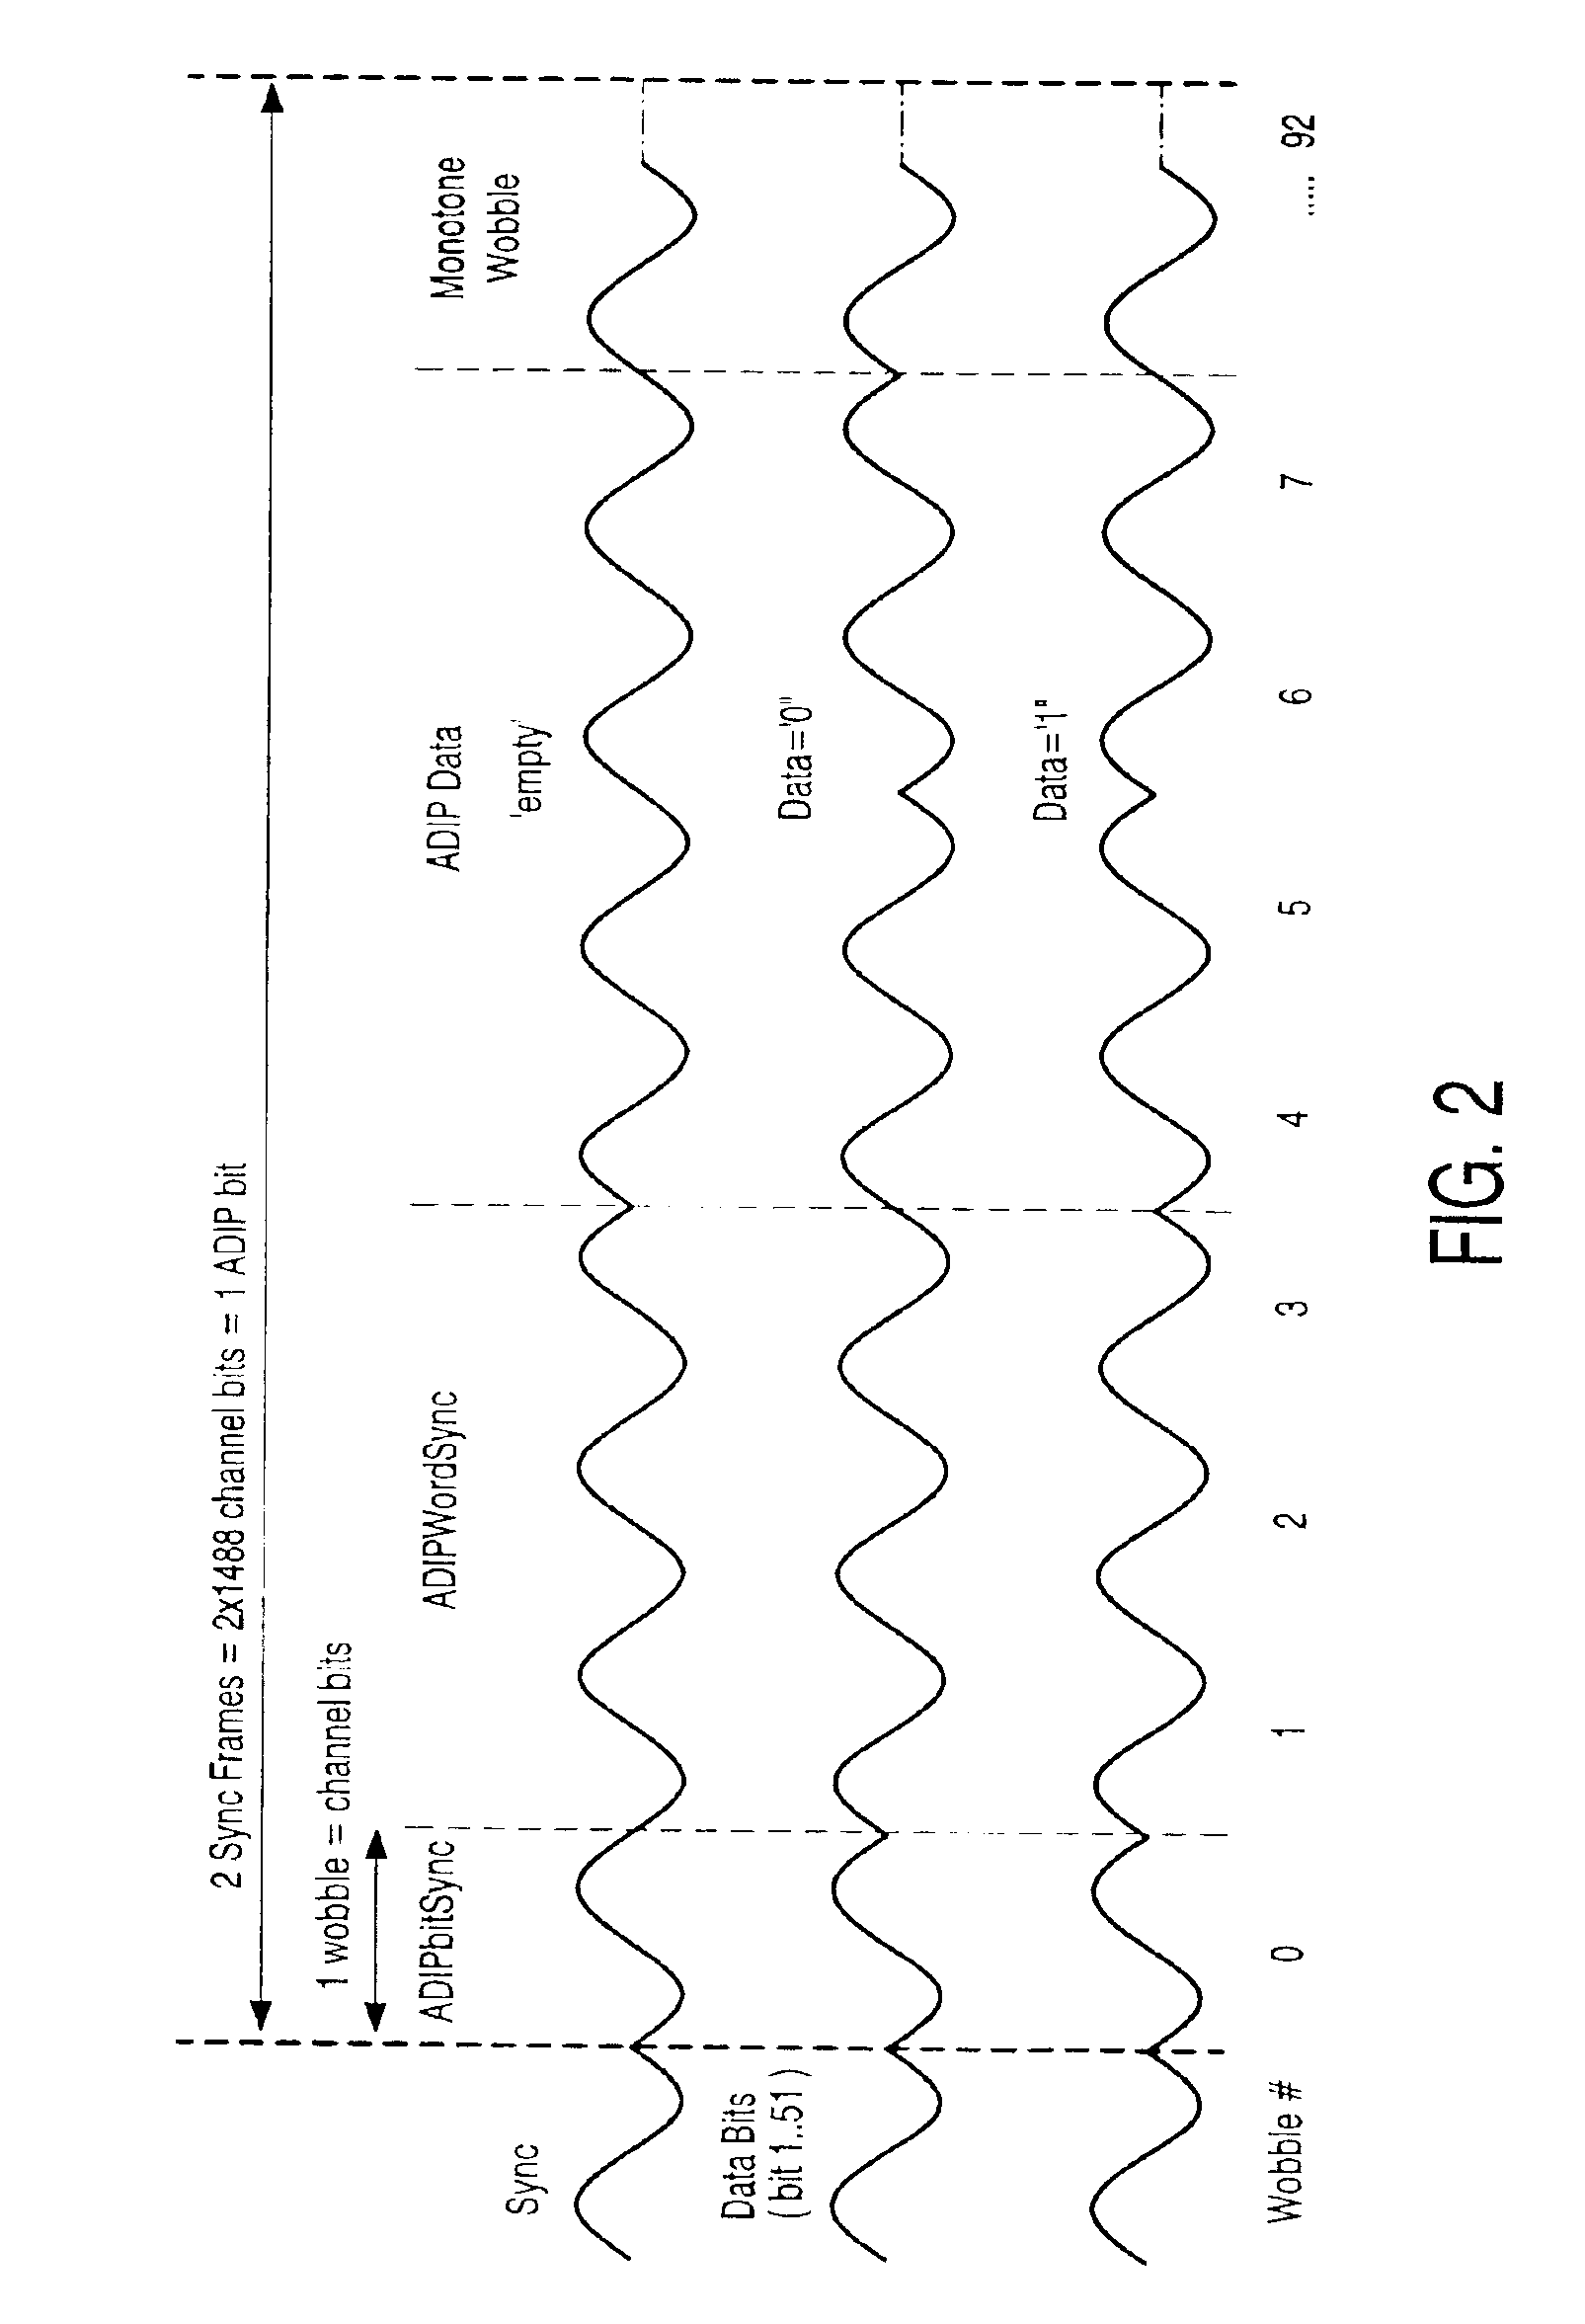 Record carrier including a servo track having first and second modulated parts representing a data type and a word sync type, respectively, and an apparatus for scanning the record carrier